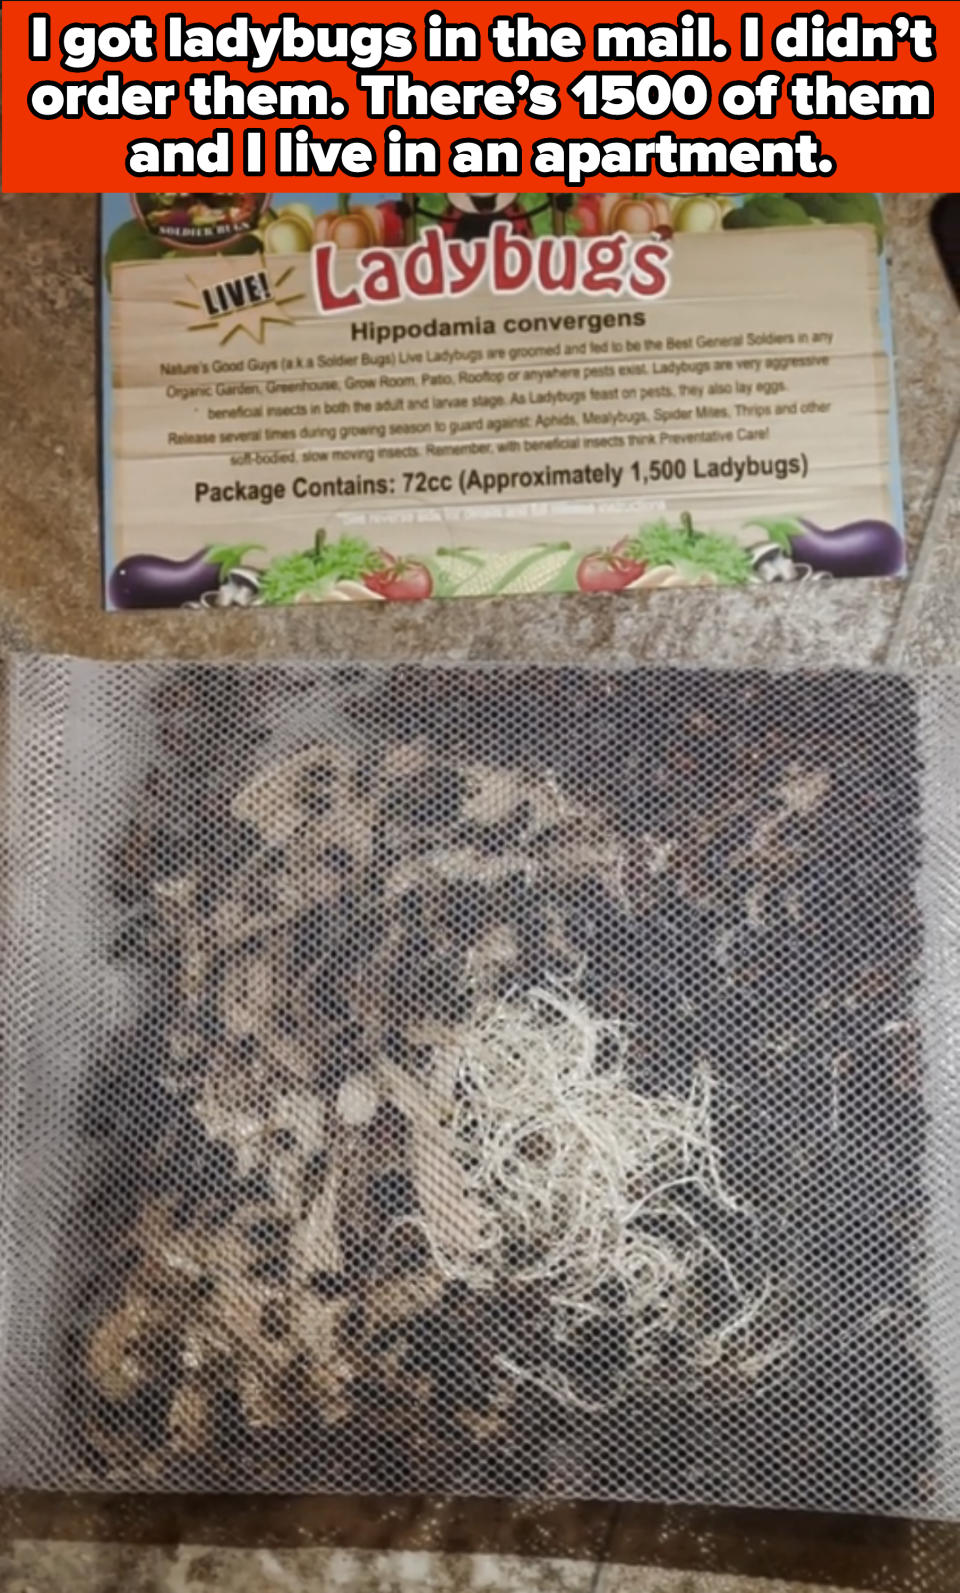 Mesh bag of live ladybugs with packaging above stating the species and quantity contained